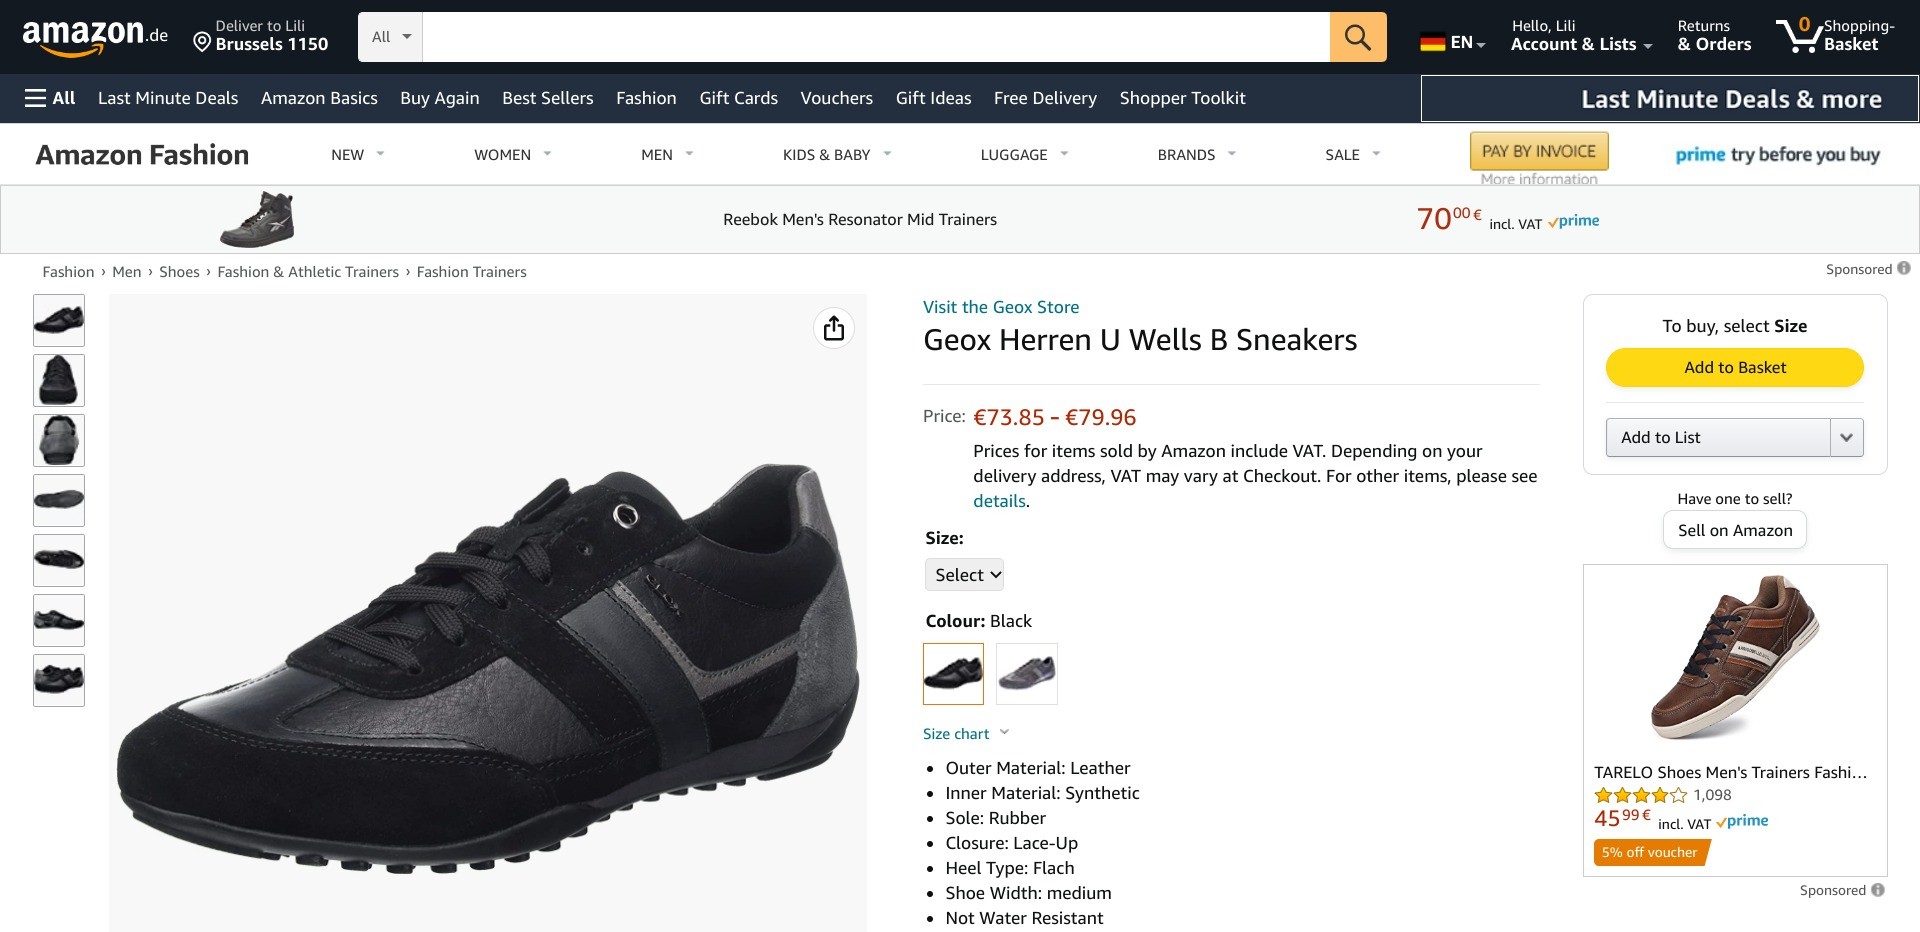 Screenshot of a random product listing on amazon.de displaying a combination of written product information and images